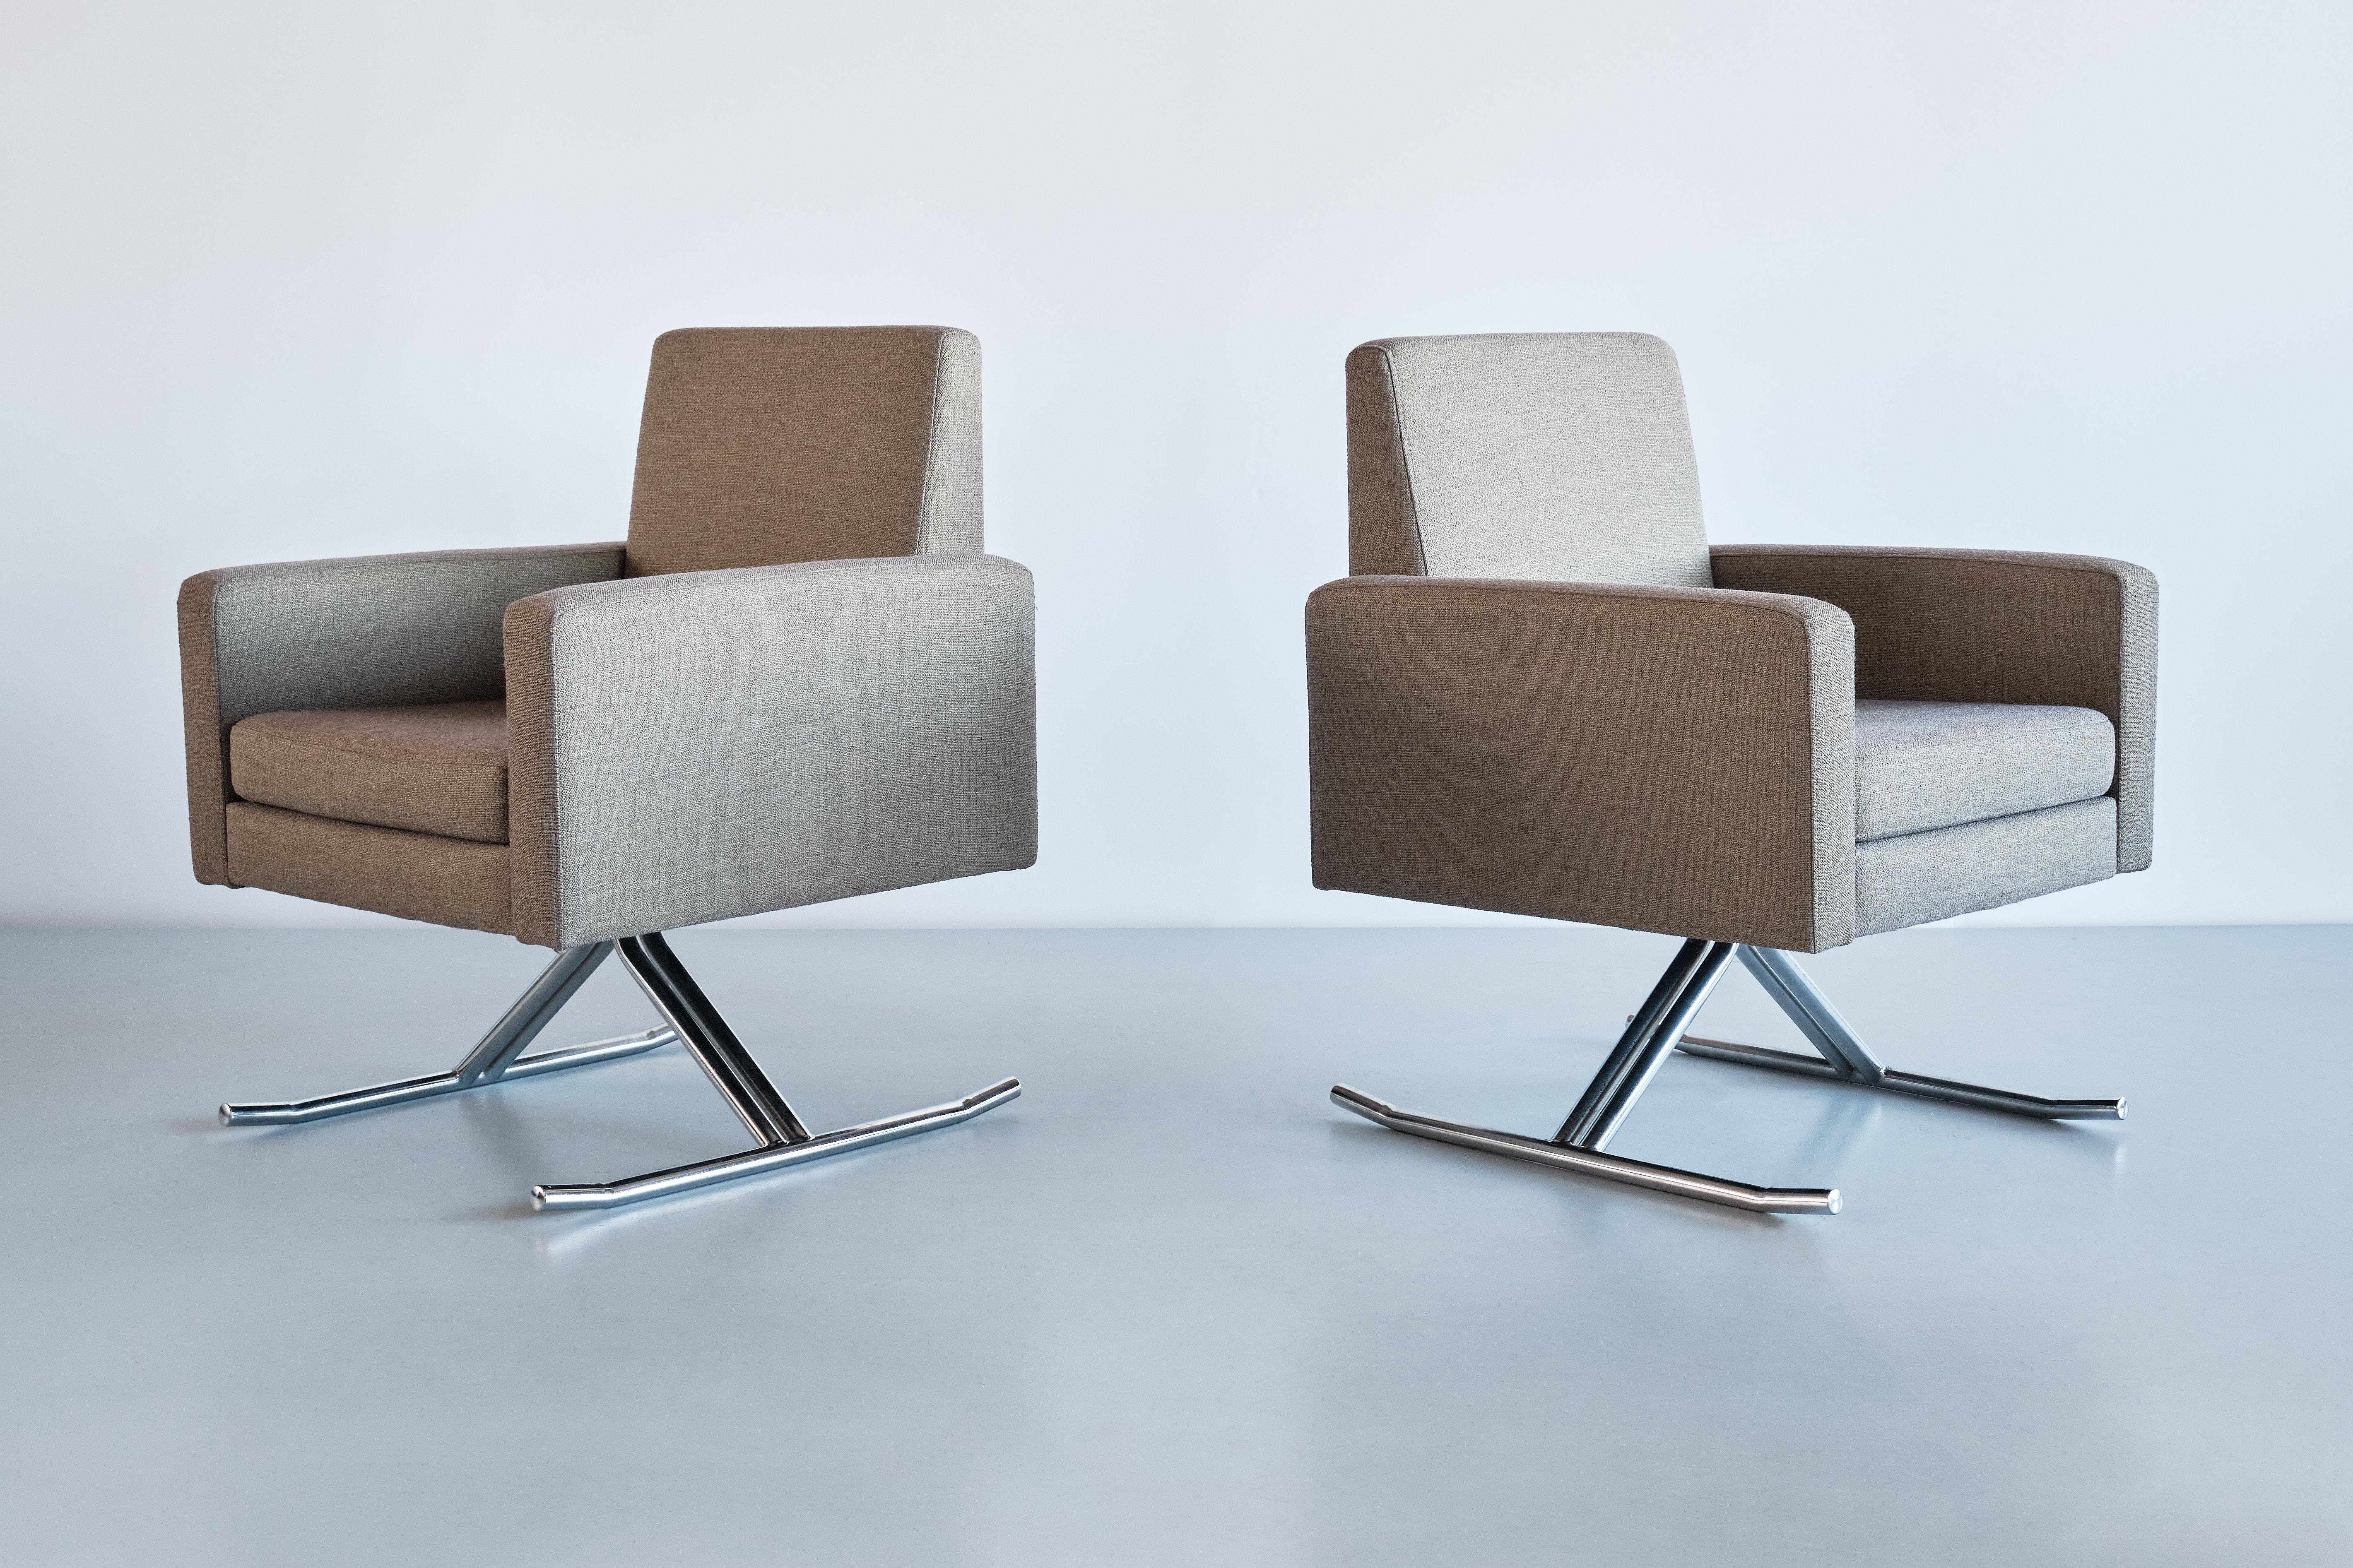 This exceptionally rare pair of armchairs was designed by Joseph-André Motte and produced by Edition MPS in France in the late 1960s. The model is named 'Luge' and was originally designed by Motte for the interior of the Grenoble City Hall in 1967